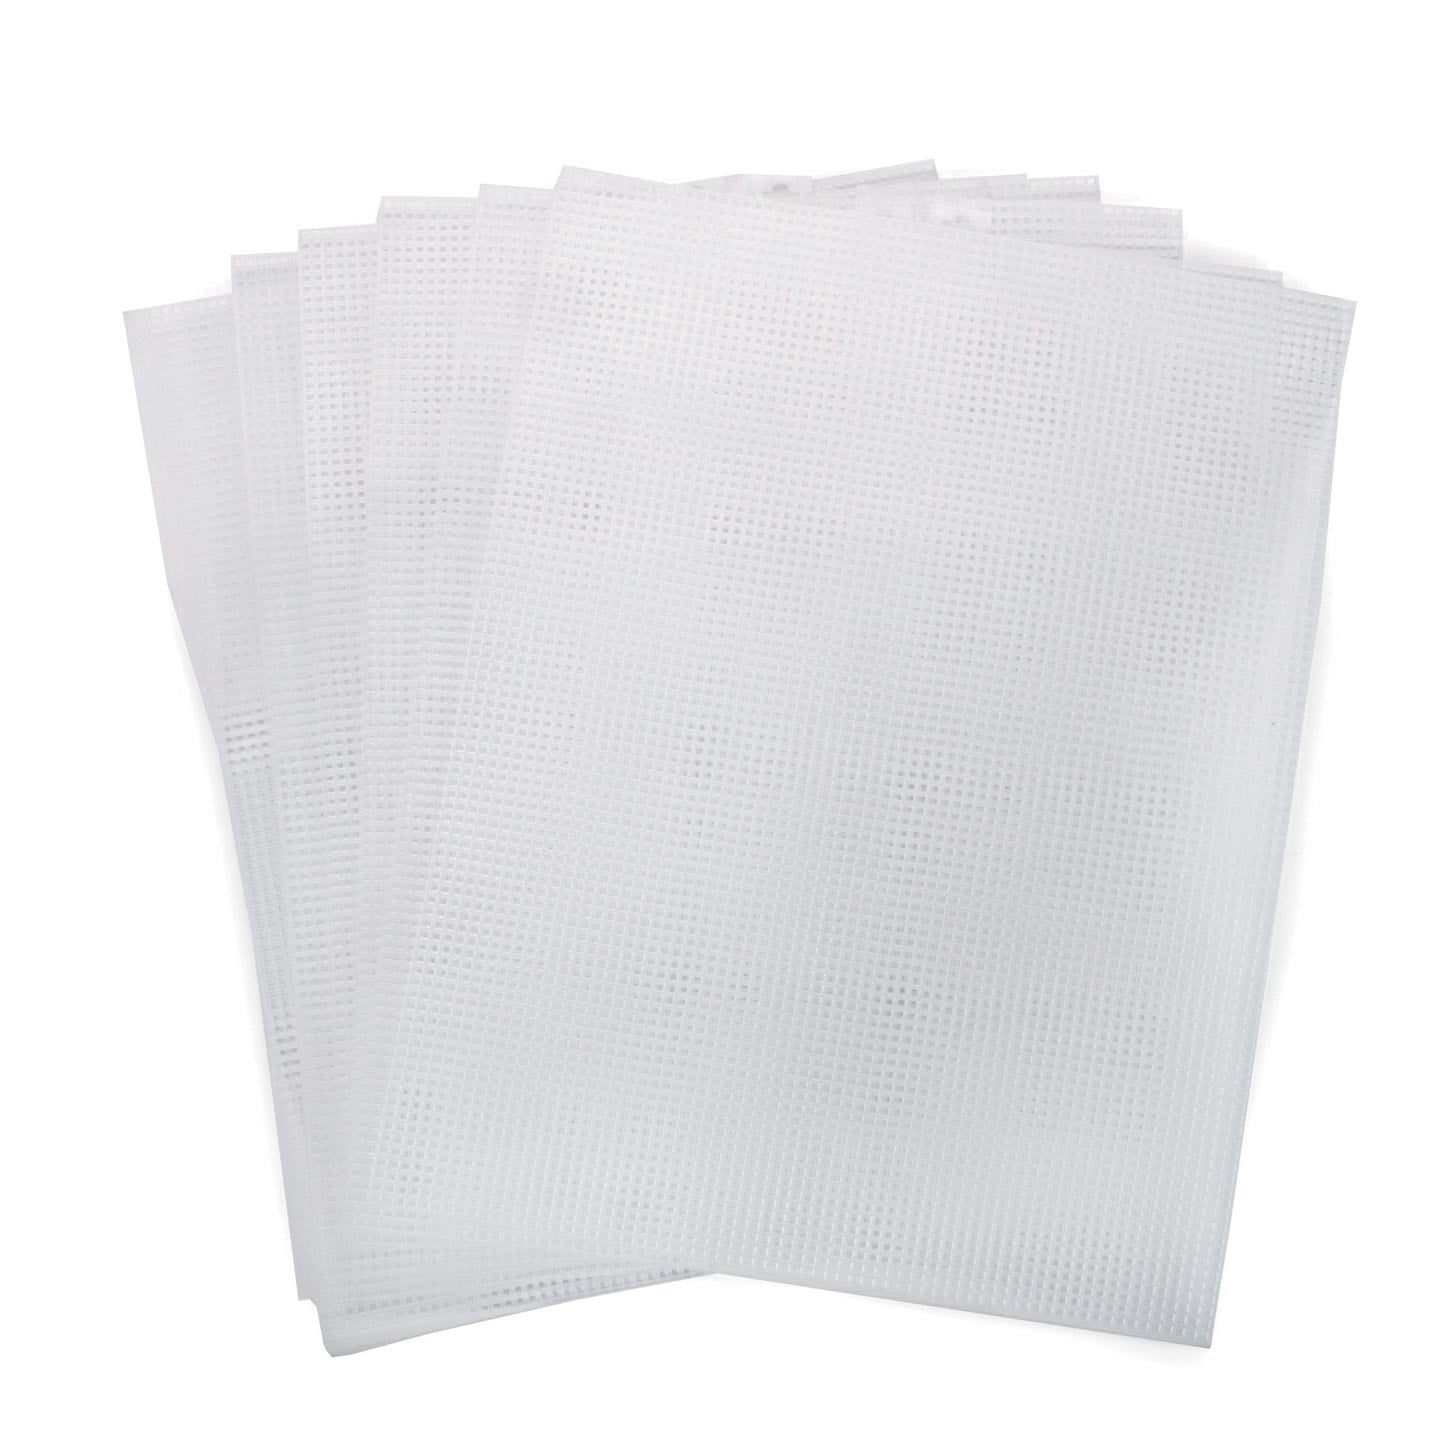 Clear Cousin DIY 10 Count Plastic Stitching Canvas 11/2 inch x 13.5 inch